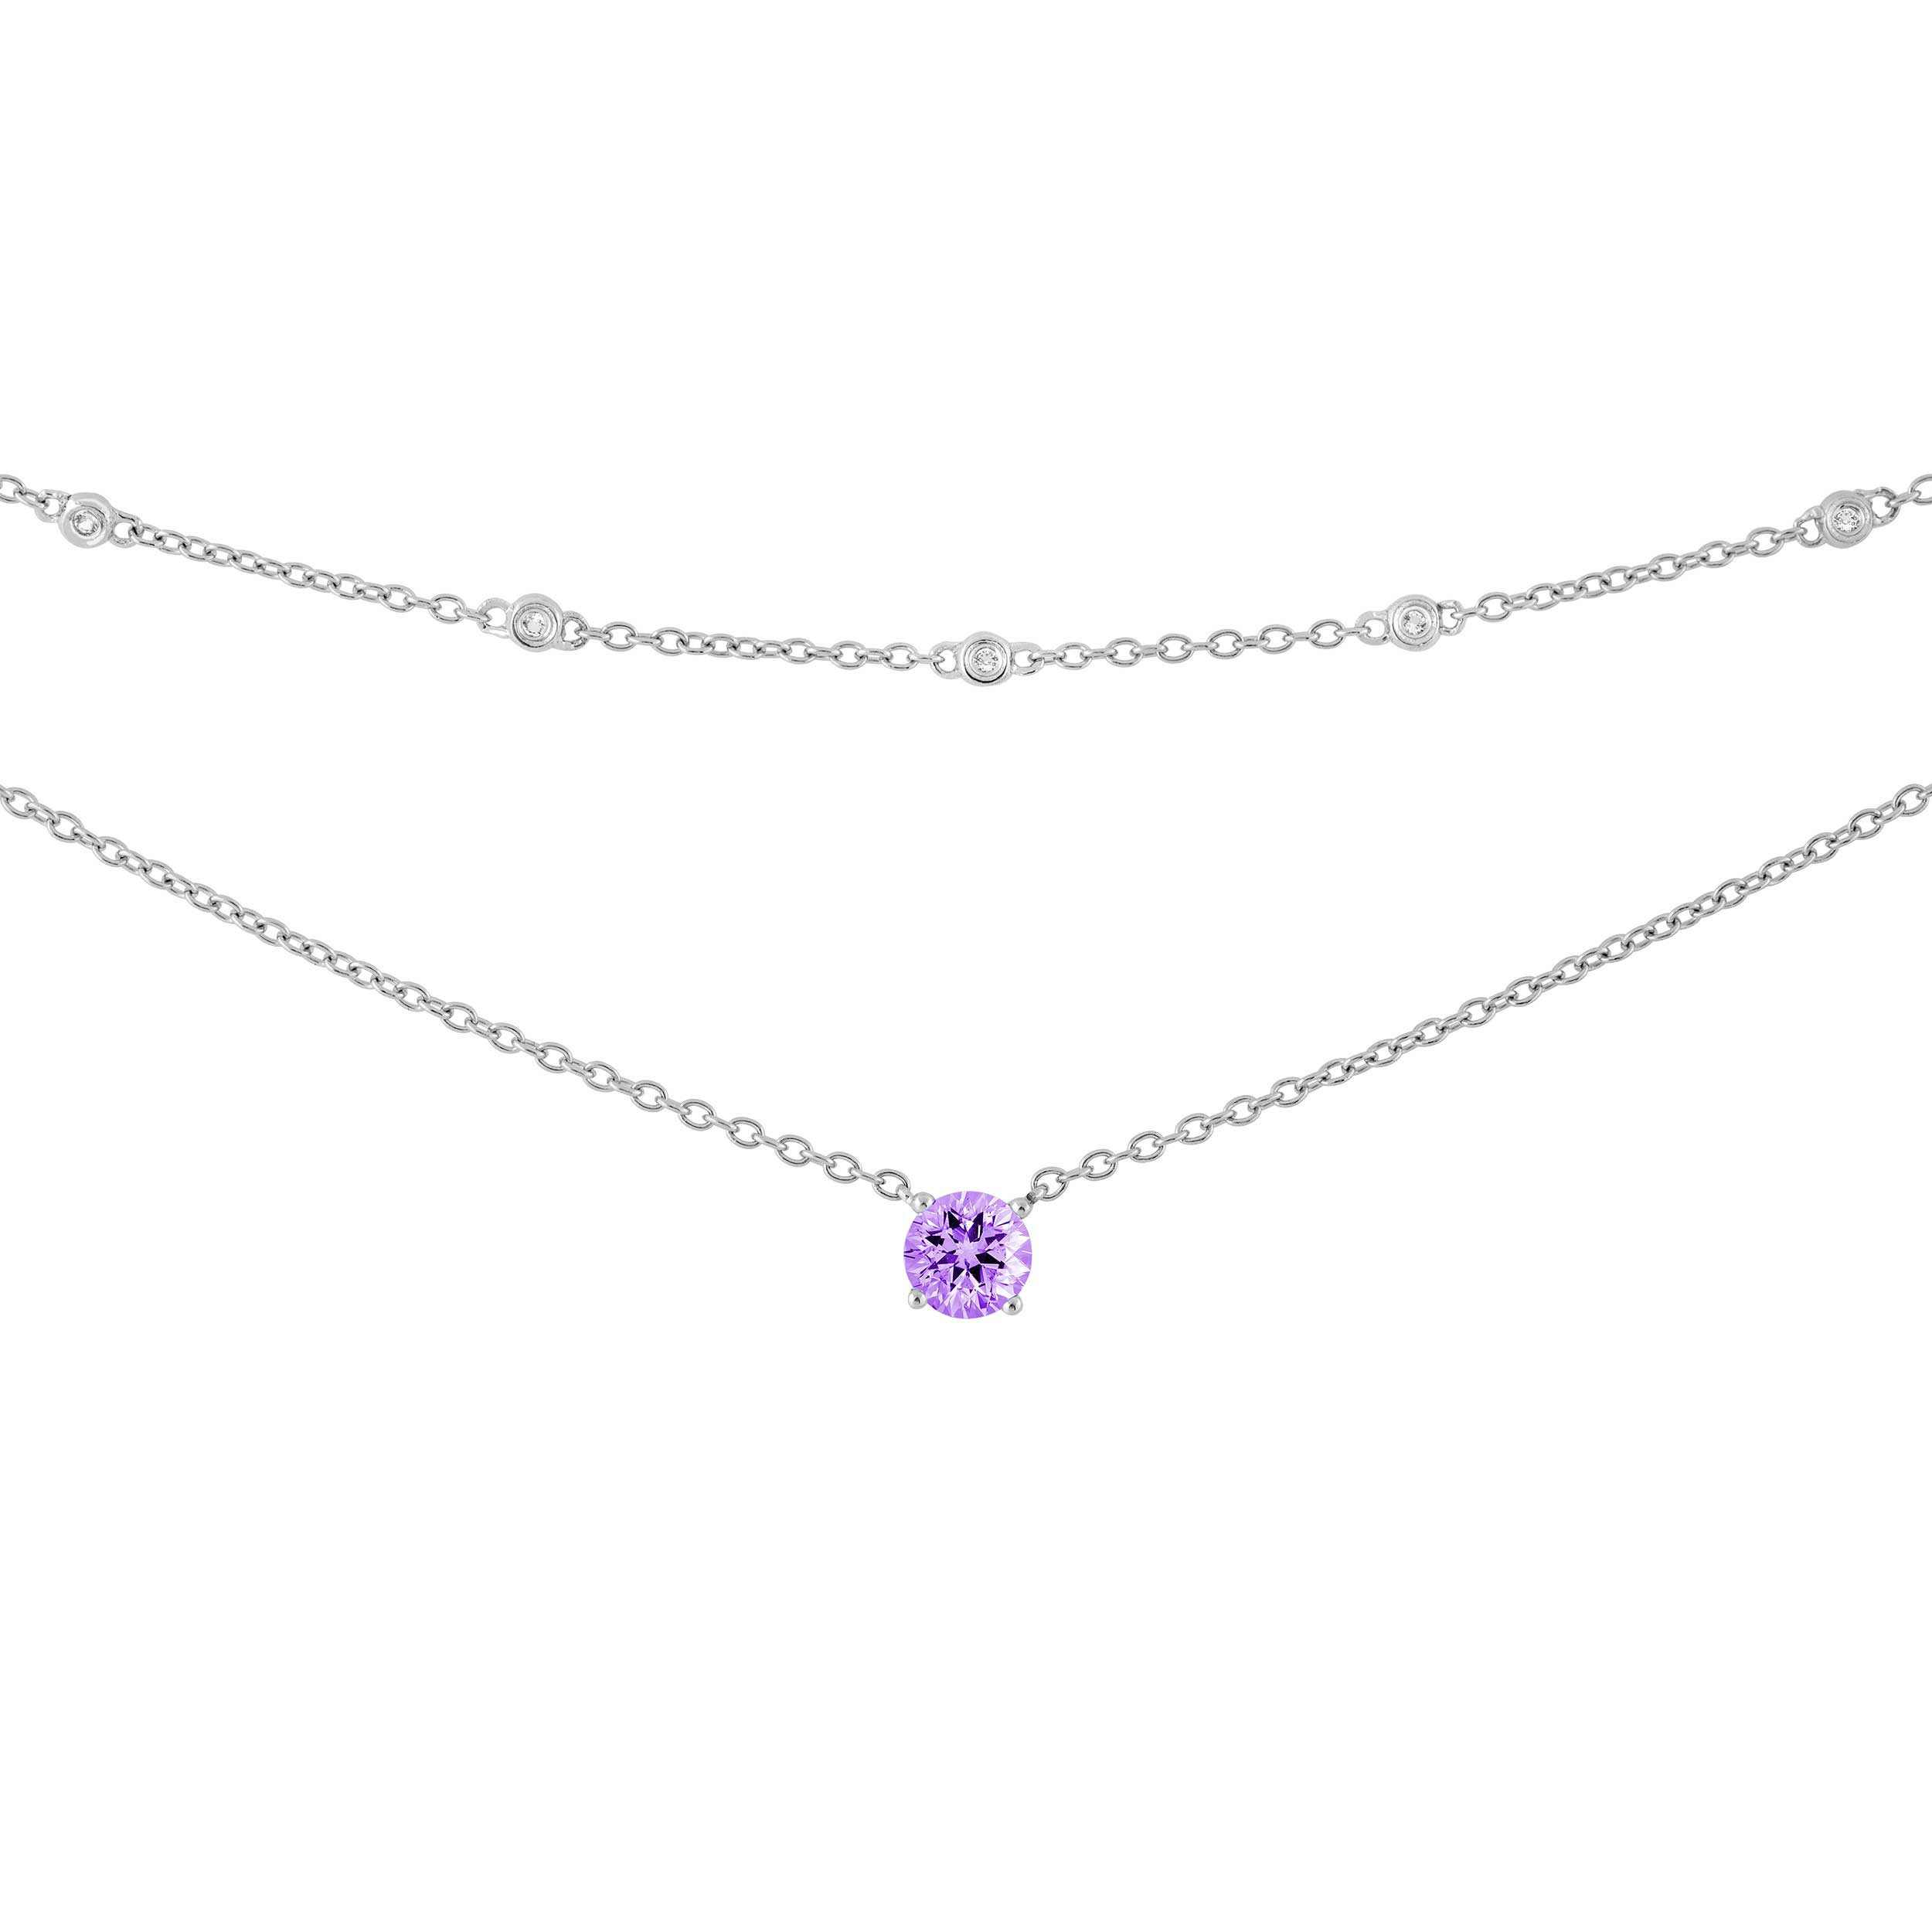 Amethyst Pendant Necklace, Rhodium Plated Sterling Silver